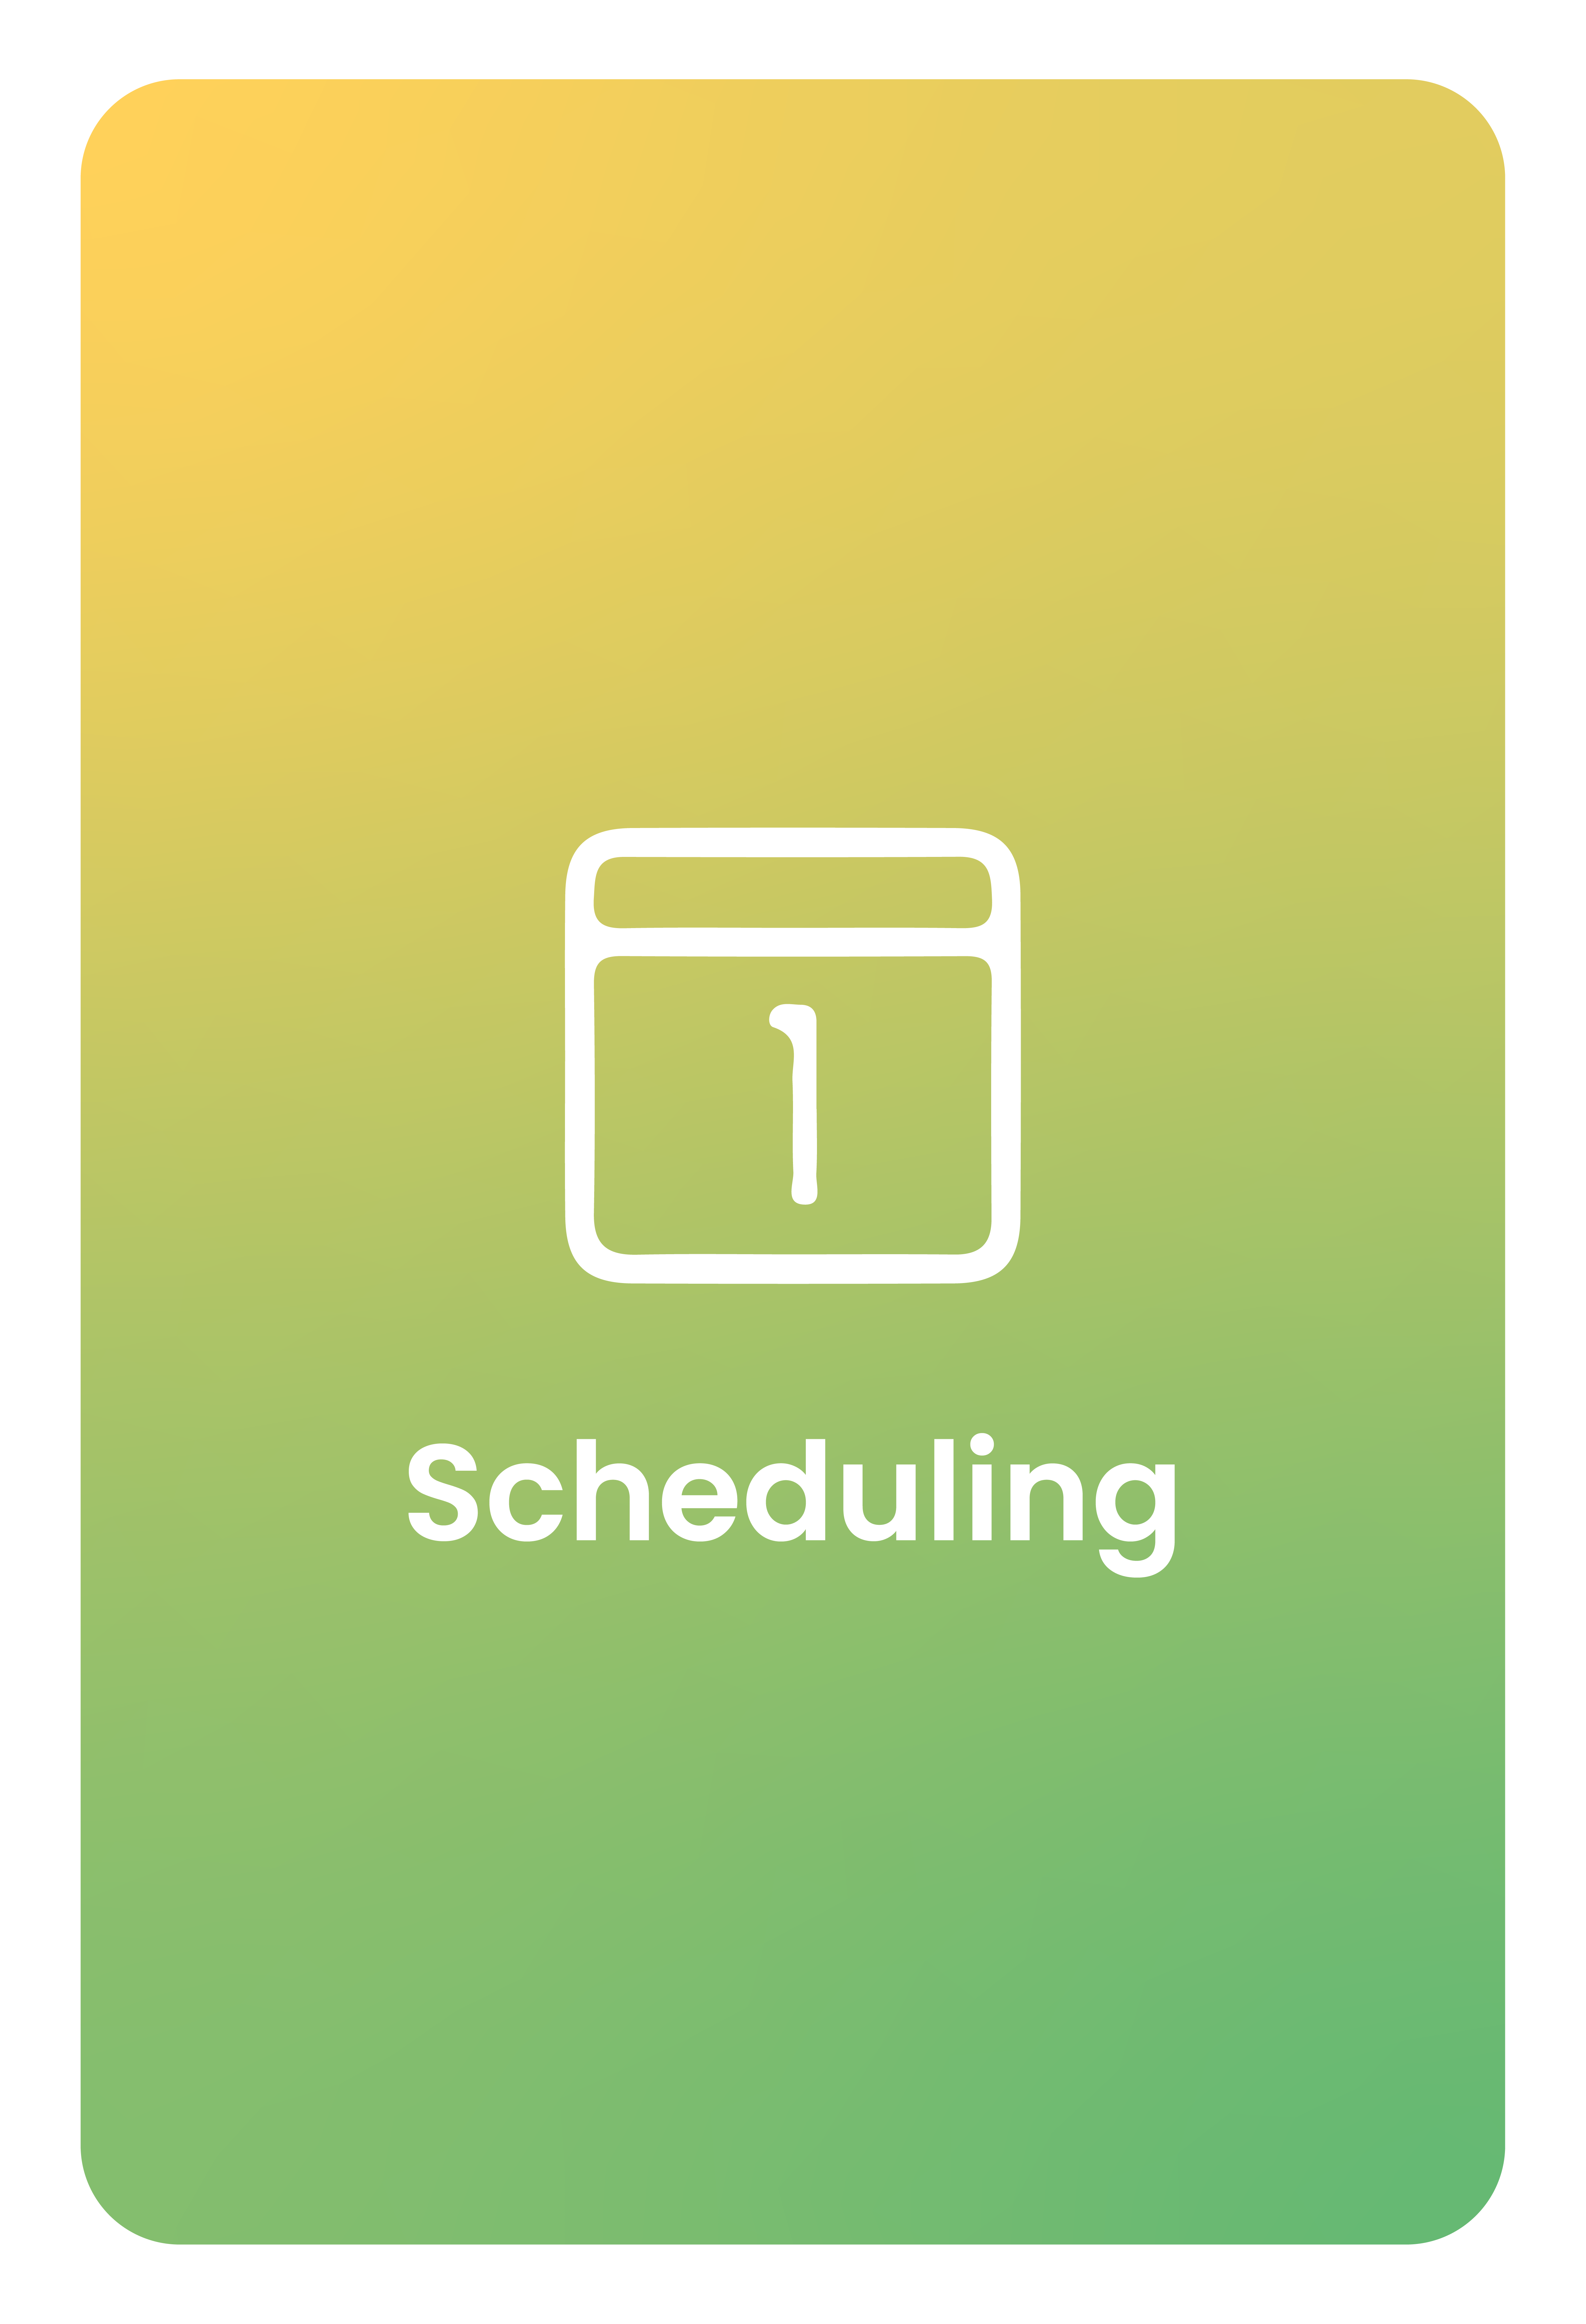 Green rounded rectangular image with title 'Scheduling'; when moused over, it says: -Set showing duration, notie required, etc. -Create one-time showing restrictions. -Client-editable showing availability. -Ability for clients to view feedback